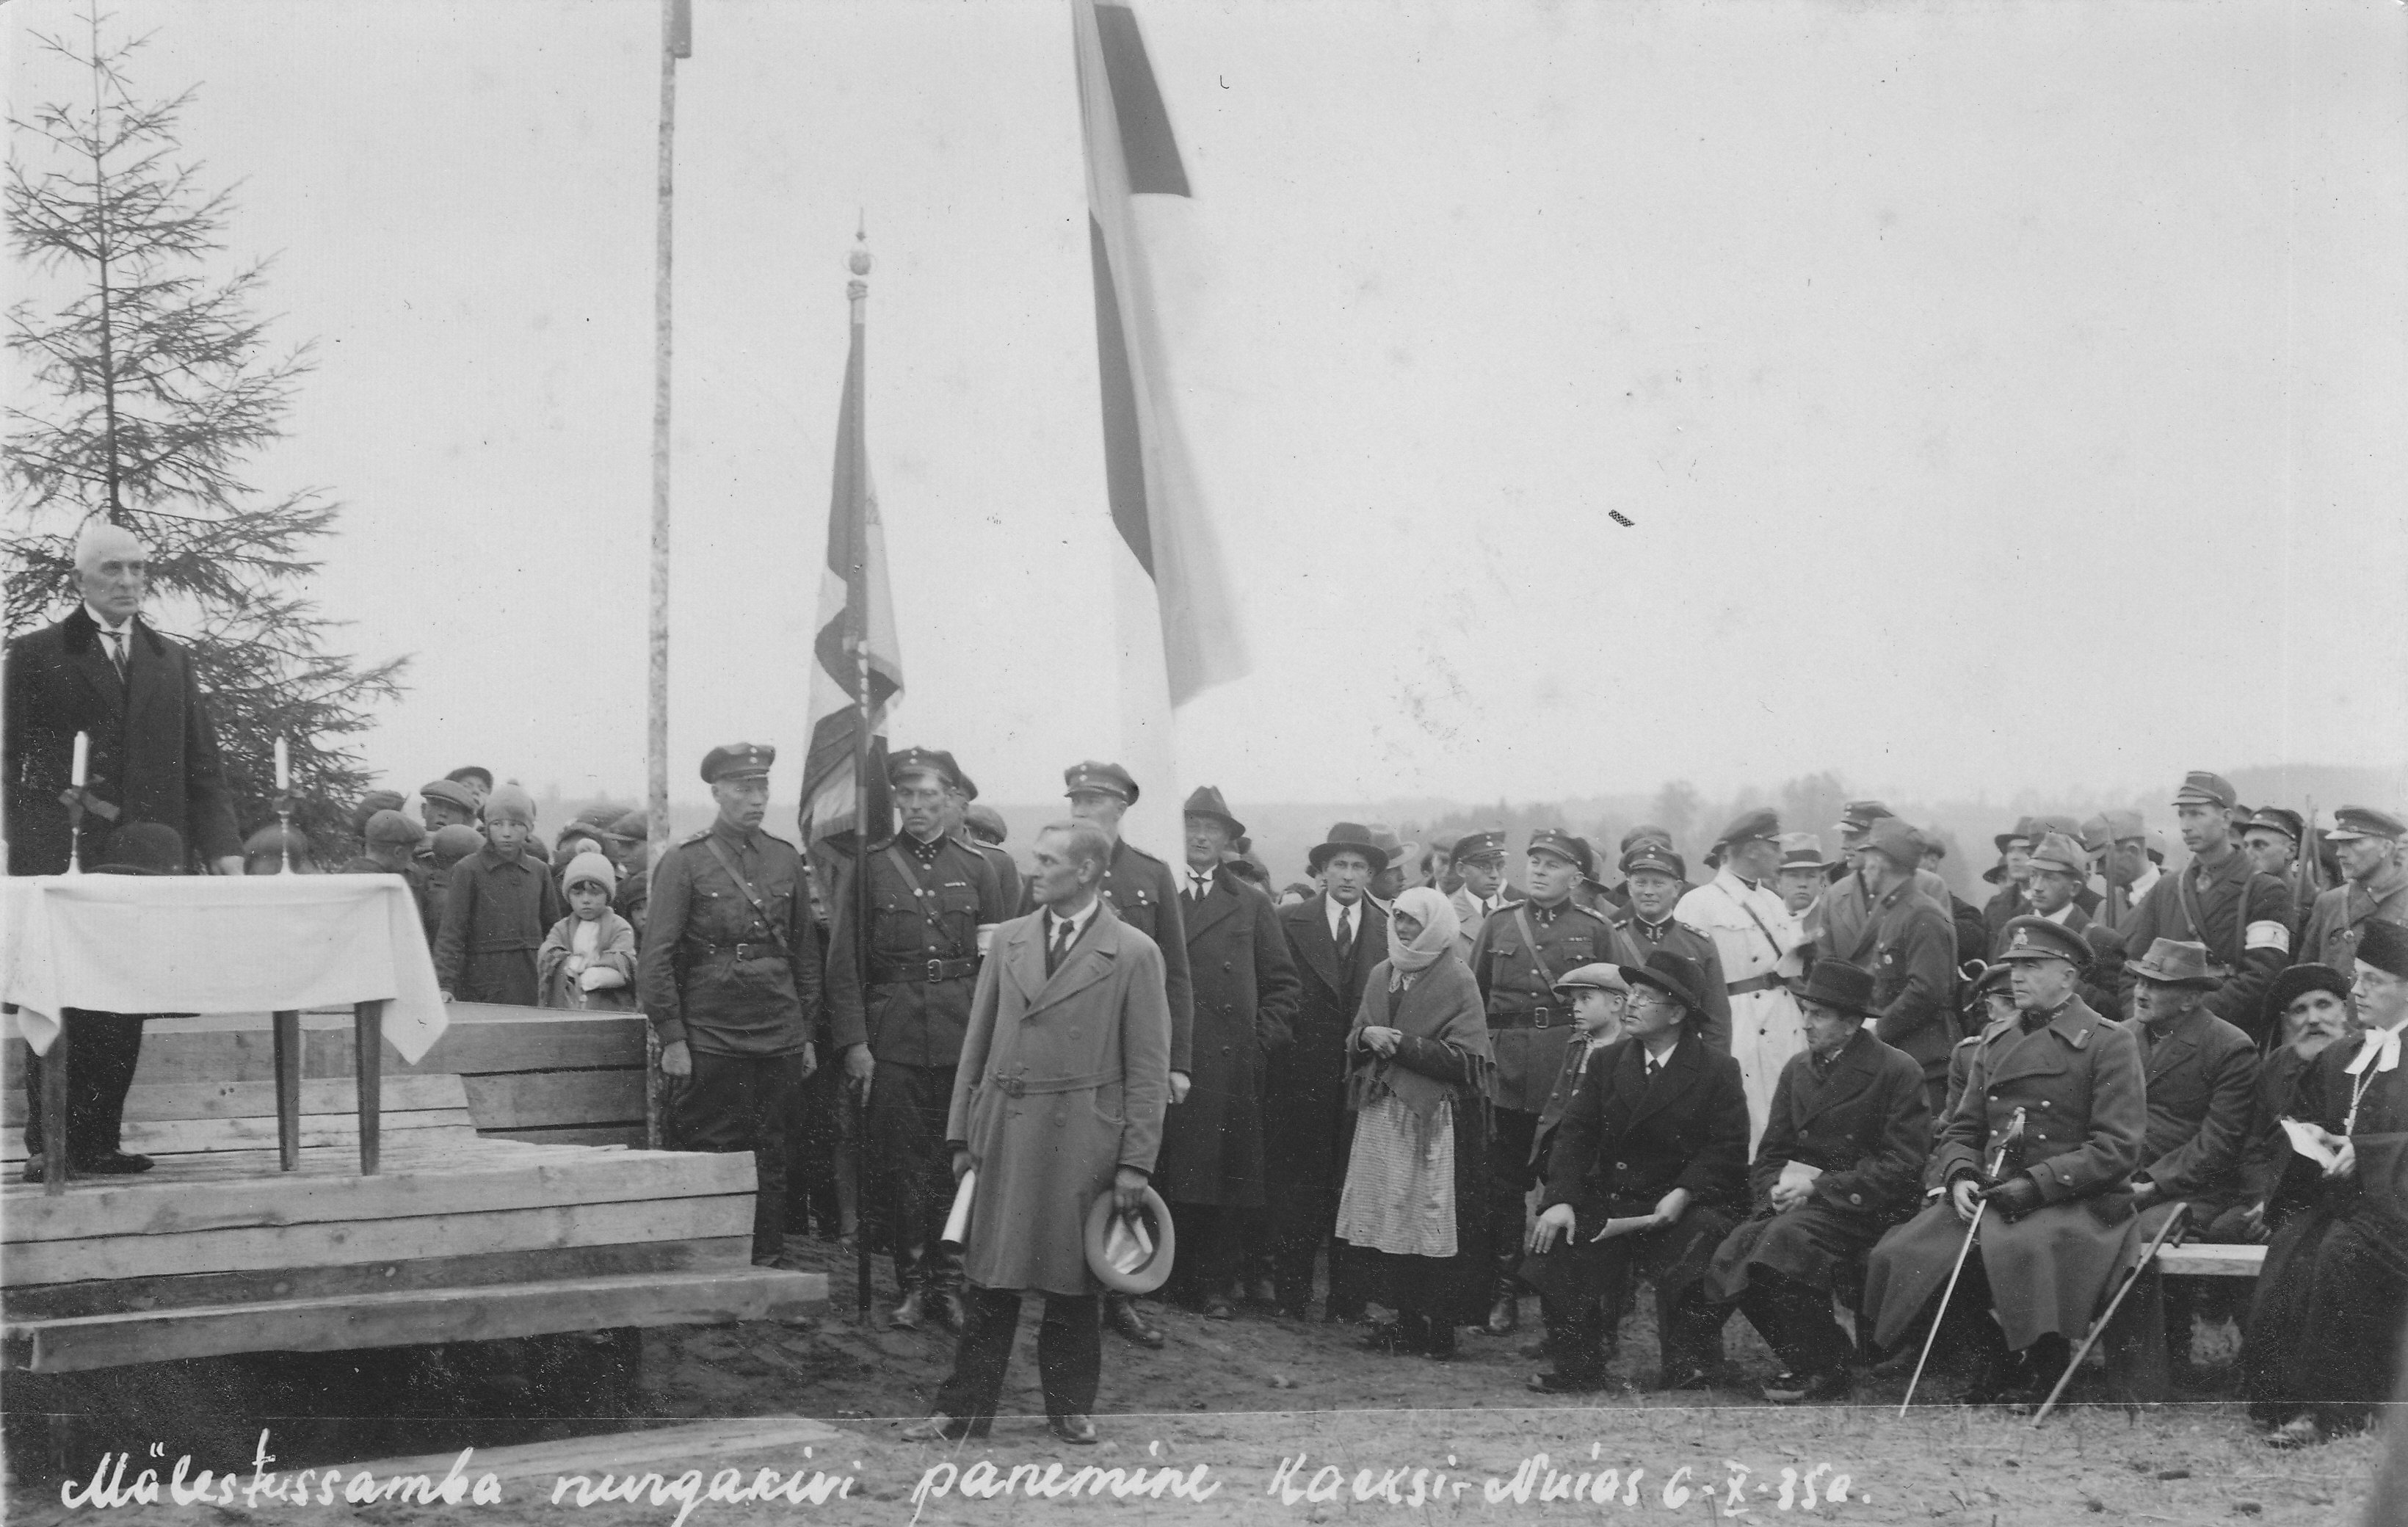 Laying the cornerstone of the monument pillar in Karksi-Nuias 06.10.1935